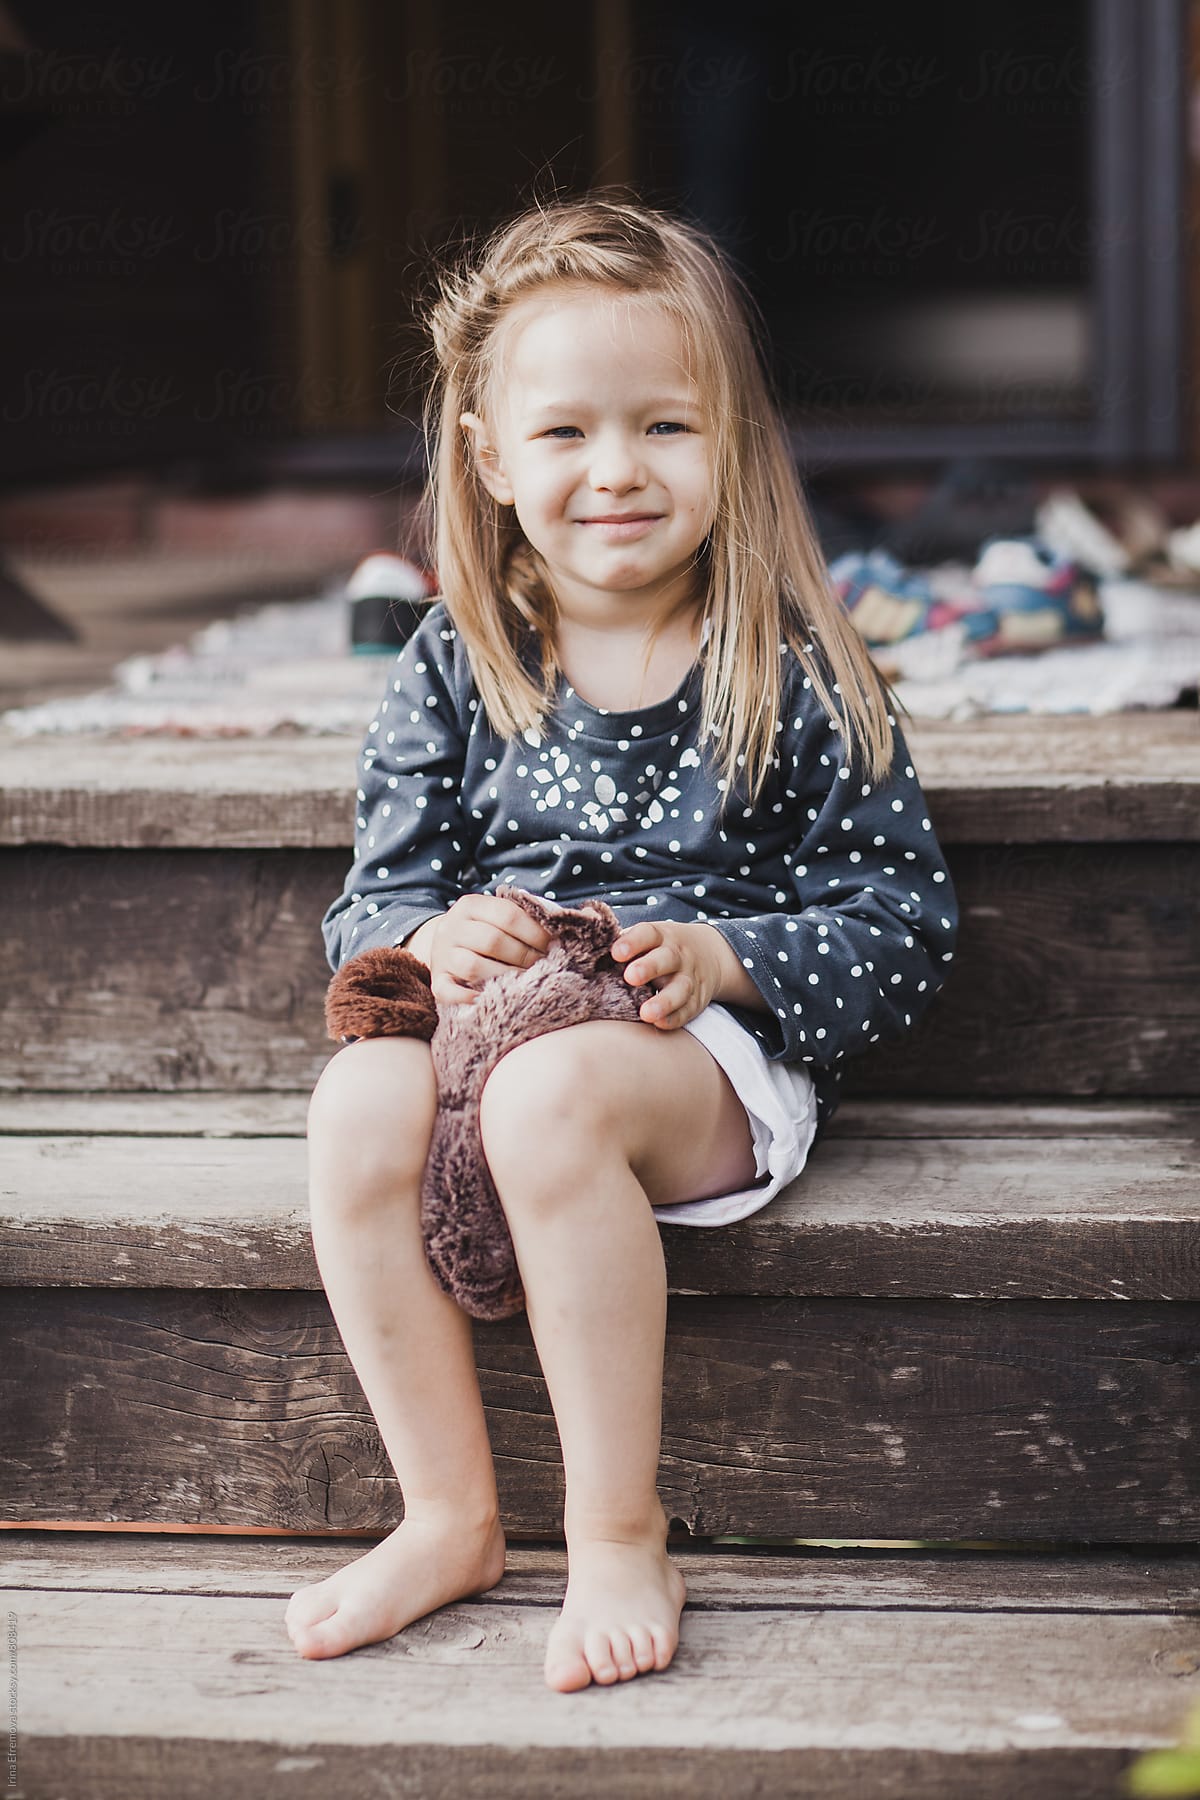 Cheeky Girl Sitting On The Porch By Stocksy Contributor Irina